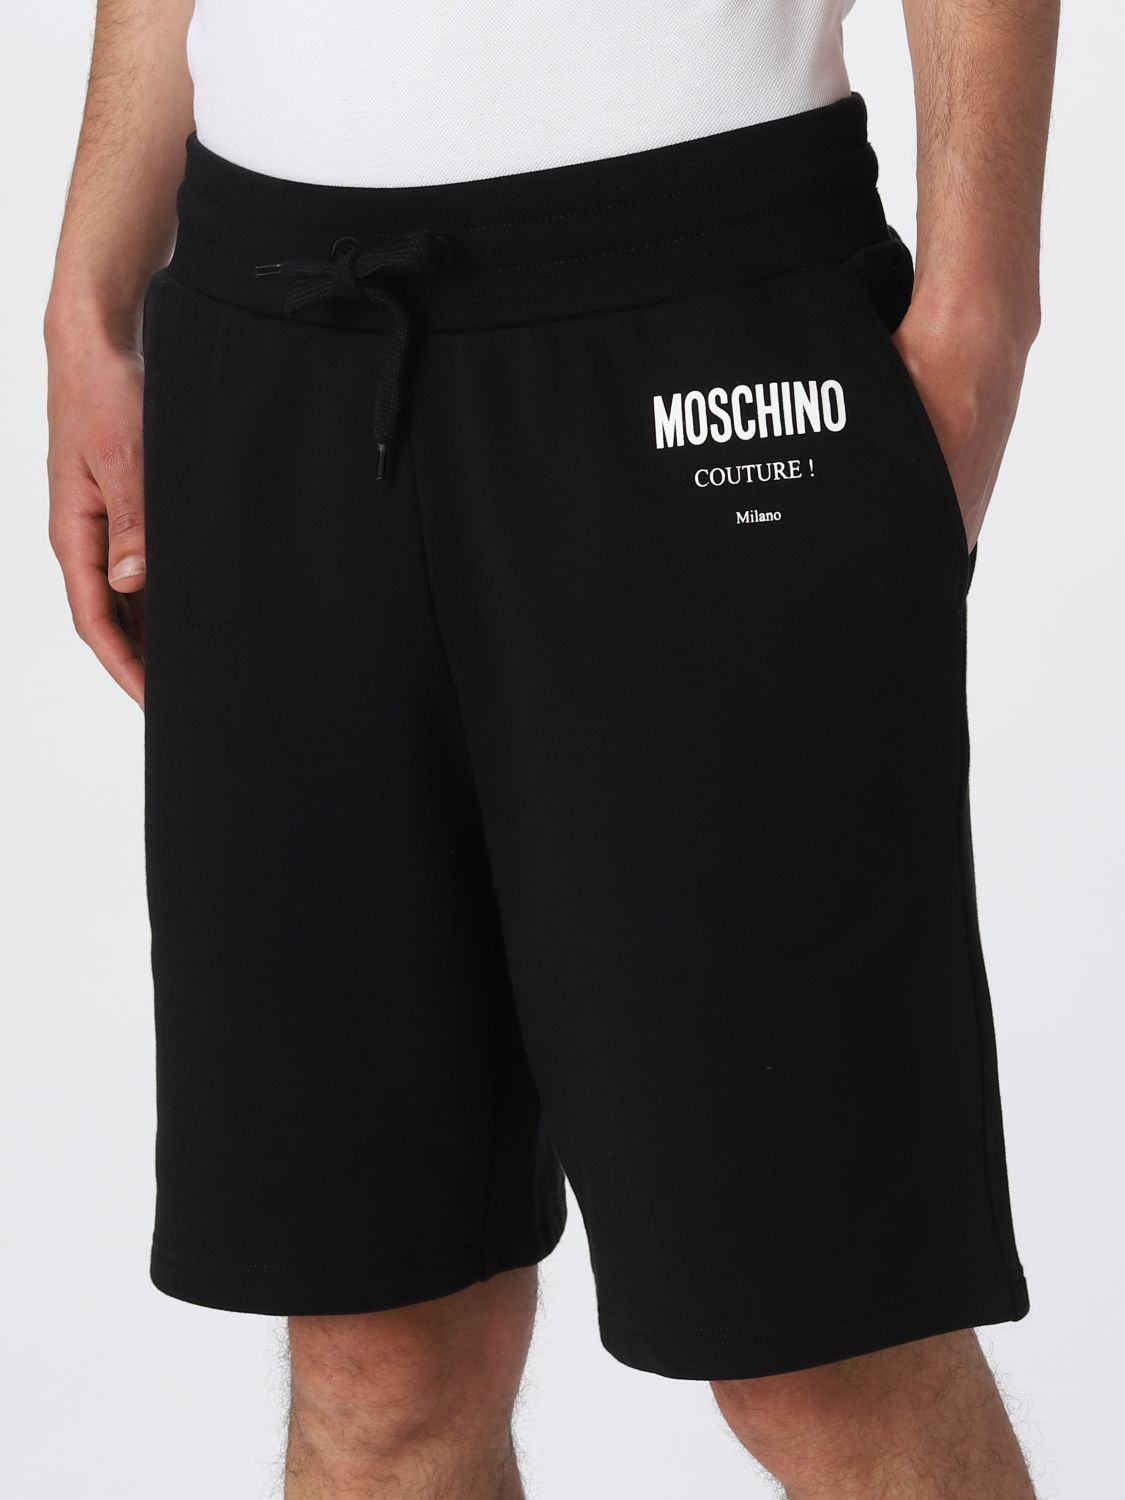 Short Moschino Couture: Moschino Couture men's pants black 4